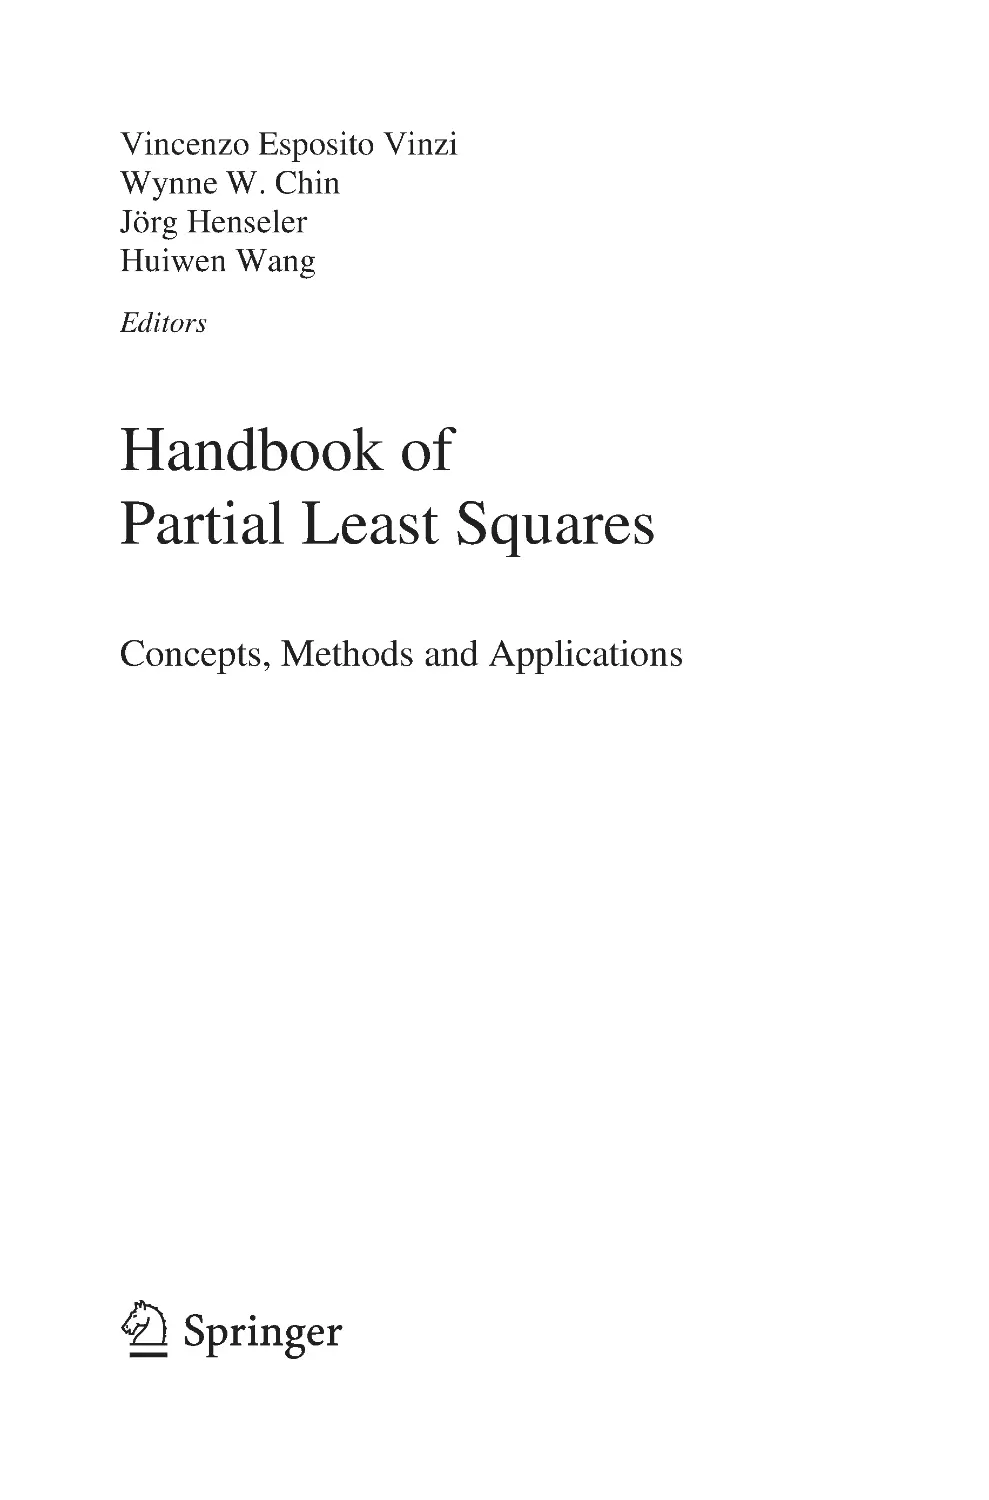 Handbook of Partial Least Squares: Concepts, Methods and Applications